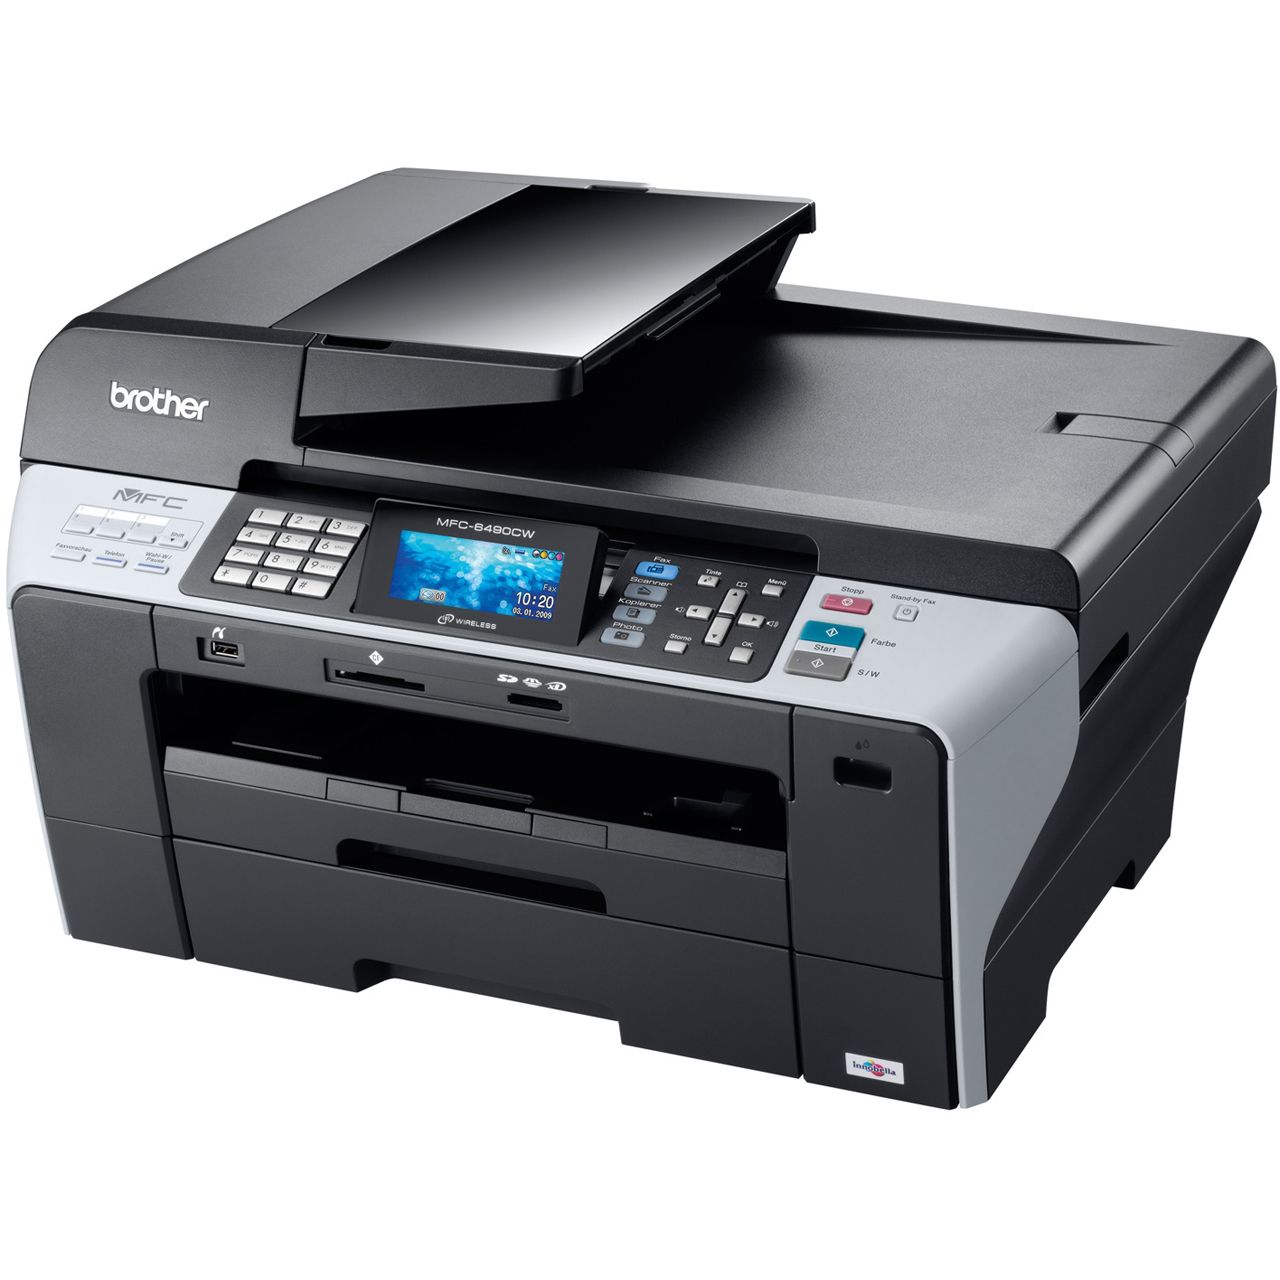 Brother MFC-6890DW Ink